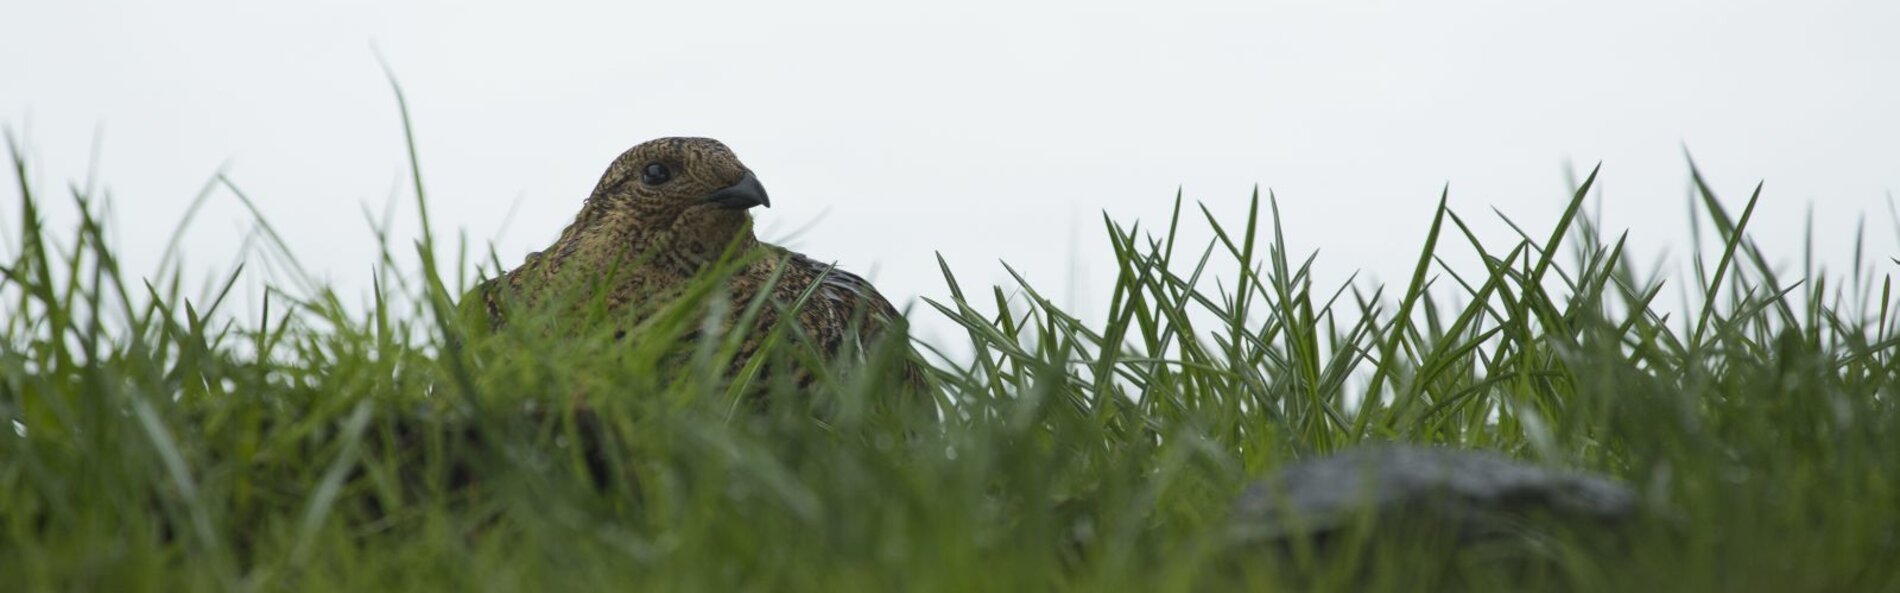 Black grouse in grass